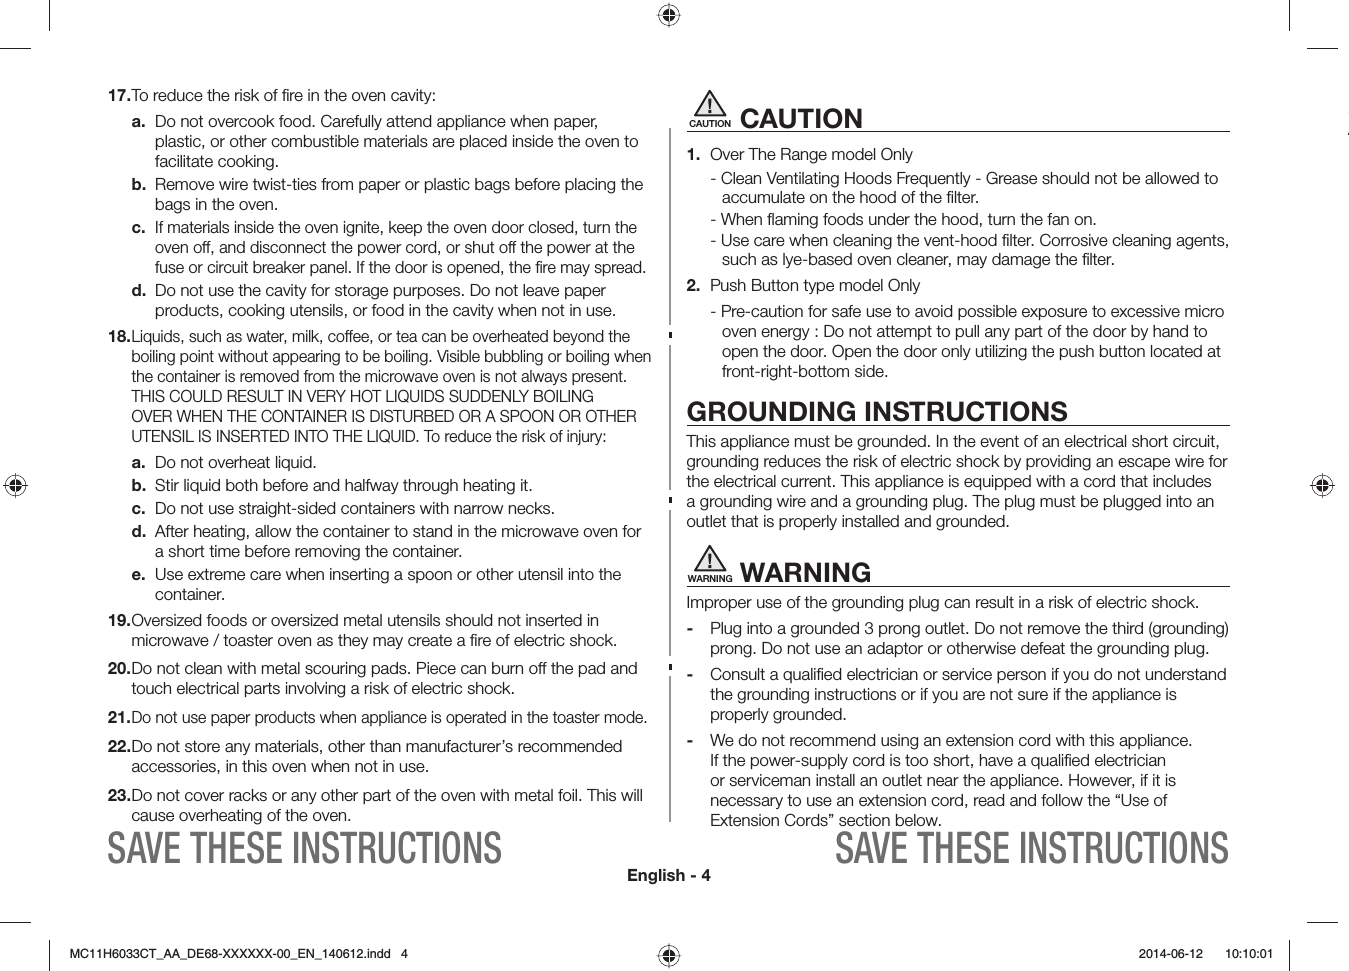 English - 4SAVE THESE INSTRUCTIONS SAVE THESE INSTRUCTIONSCAUTION CAUTION1.  Over The Range model Only - Clean Ventilating Hoods Frequently - Grease should not be allowed to accumulate on the hood of the ﬁlter.- When ﬂaming foods under the hood, turn the fan on.- Use care when cleaning the vent-hood ﬁlter. Corrosive cleaning agents, such as lye-based oven cleaner, may damage the ﬁlter.2.  Push Button type model Only- Pre-caution for safe use to avoid possible exposure to excessive micro oven energy : Do not attempt to pull any part of the door by hand to open the door. Open the door only utilizing the push button located at front-right-bottom side.GROUNDING INSTRUCTIONSThis appliance must be grounded. In the event of an electrical short circuit, grounding reduces the risk of electric shock by providing an escape wire for the electrical current. This appliance is equipped with a cord that includes a grounding wire and a grounding plug. The plug must be plugged into an outlet that is properly installed and grounded.WARNING WARNINGImproper use of the grounding plug can result in a risk of electric shock. -  Plug into a grounded 3 prong outlet. Do not remove the third (grounding) prong. Do not use an adaptor or otherwise defeat the grounding plug.-  Consult a qualiﬁed electrician or service person if you do not understand the grounding instructions or if you are not sure if the appliance is properly grounded.-  We do not recommend using an extension cord with this appliance. If the power-supply cord is too short, have a qualiﬁed electrician or serviceman install an outlet near the appliance. However, if it is necessary to use an extension cord, read and follow the “Use of Extension Cords” section below.A17. To reduce the risk of ﬁre in the oven cavity:a.  Do not overcook food. Carefully attend appliance when paper, plastic, or other combustible materials are placed inside the oven to facilitate cooking.b.  Remove wire twist-ties from paper or plastic bags before placing the bags in the oven.c. If materials inside the oven ignite, keep the oven door closed, turn the oven off, and disconnect the power cord, or shut off the power at the fuse or circuit breaker panel. If the door is opened, the ﬁre may spread.d.  Do not use the cavity for storage purposes. Do not leave paper products, cooking utensils, or food in the cavity when not in use.18.  Liquids, such as water, milk, coee, or tea can be overheated beyond the boiling point without appearing to be boiling. Visible bubbling or boiling when the container is removed from the microwave oven is not always present. THIS COULD RESULT IN VERY HOT LIQUIDS SUDDENLY BOILING OVER WHEN THE CONTAINER IS DISTURBED OR A SPOON OR OTHER UTENSIL IS INSERTED INTO THE LIQUID. To reduce the risk of injury:a.  Do not overheat liquid.b.  Stir liquid both before and halfway through heating it.c.  Do not use straight-sided containers with narrow necks.d.  After heating, allow the container to stand in the microwave oven for a short time before removing the container.e.  Use extreme care when inserting a spoon or other utensil into the container.19.  Oversized foods or oversized metal utensils should not inserted in microwave / toaster oven as they may create a ﬁre of electric shock.20.  Do not clean with metal scouring pads. Piece can burn o the pad and touch electrical parts involving a risk of electric shock.21.  Do not use paper products when appliance is operated in the toaster mode.22.  Do not store any materials, other than manufacturer’s recommended accessories, in this oven when not in use.23.  Do not cover racks or any other part of the oven with metal foil. This will cause overheating of the oven.MC11H6033CT_AA_DE68-XXXXXX-00_EN_140612.indd   4  